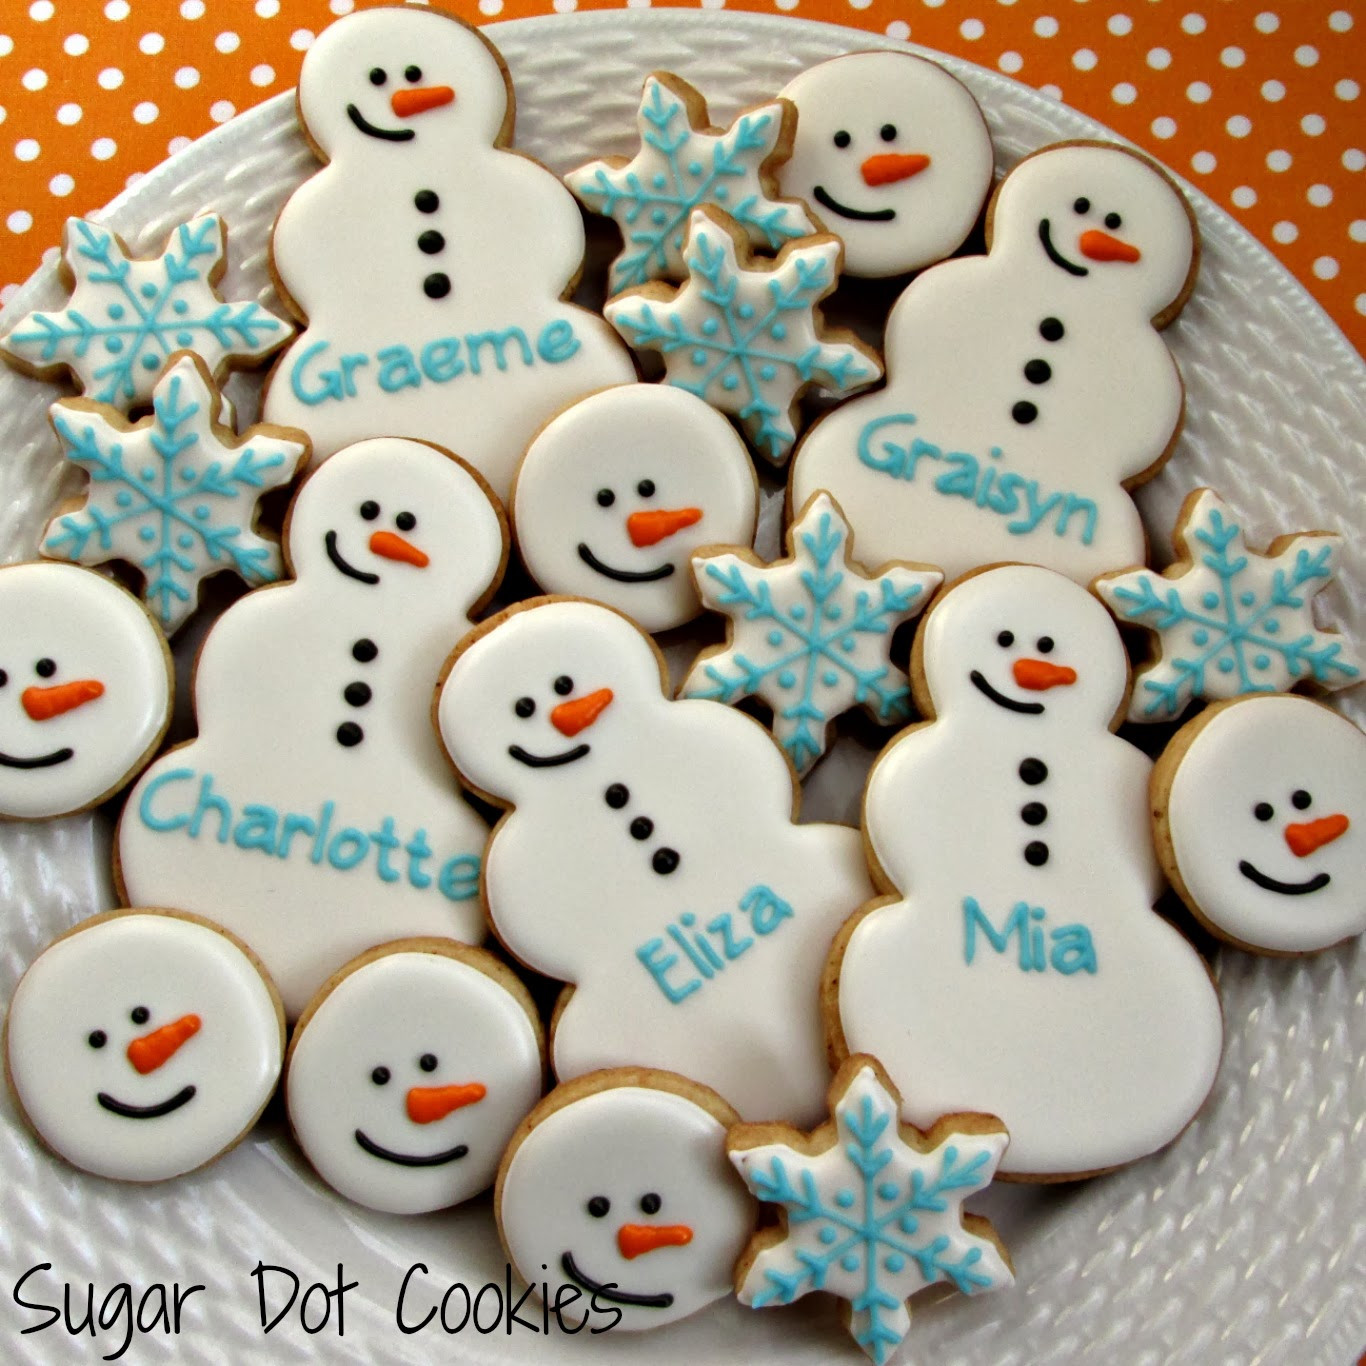 Christmas Sugar Cookies With Royal Icing
 Snowman heads and mini flakes